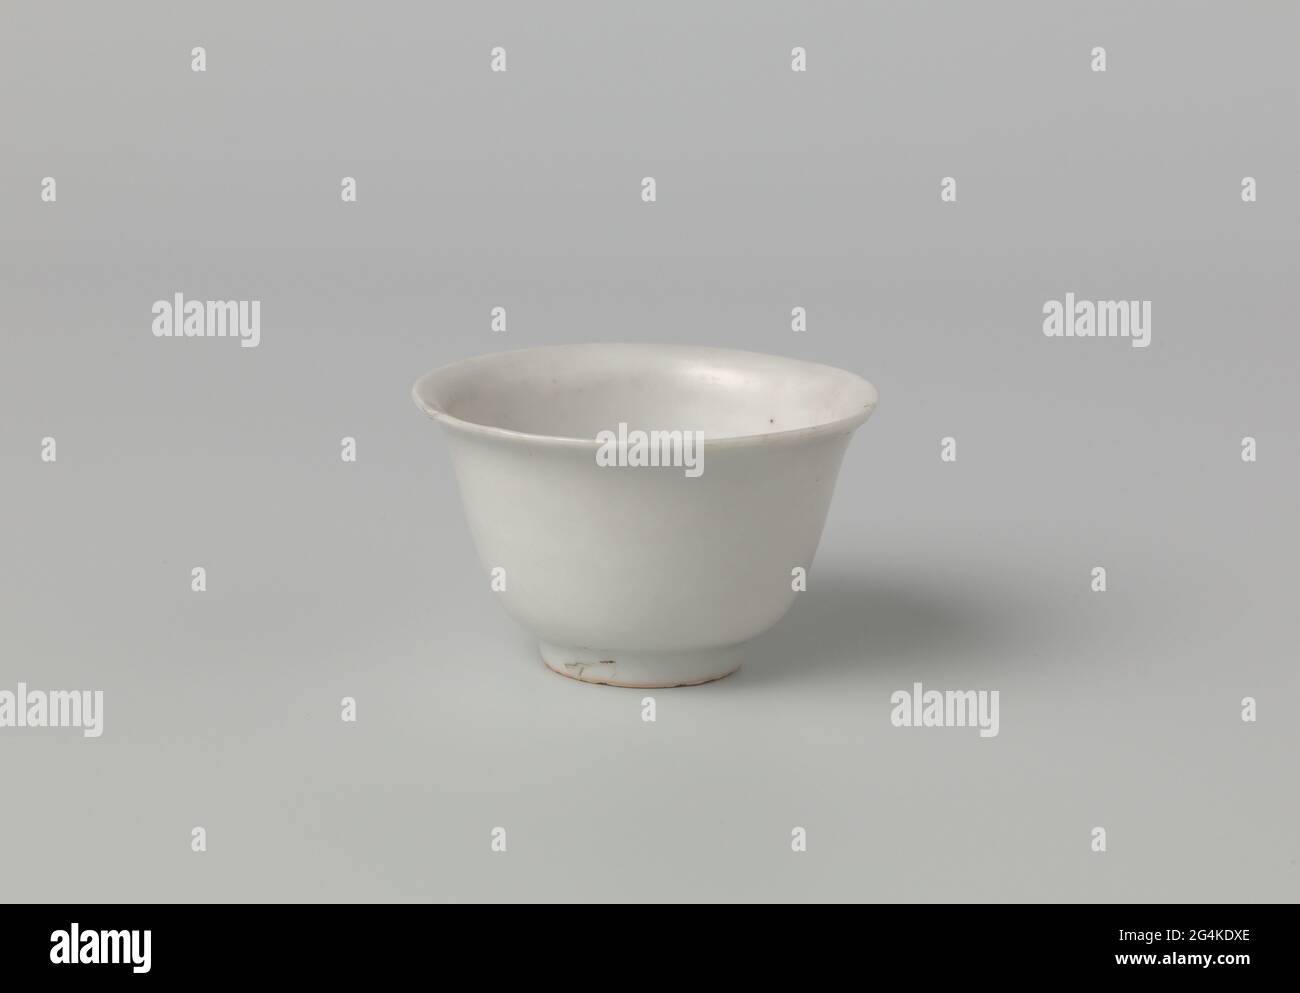 Bell-shaped bowl with a white glaze. Bell-shaped bowl of porcelain, covered with a white glaze. Marked on the underside with an unidentified seal brand. A chip in the edge. White porcelain. Stock Photo